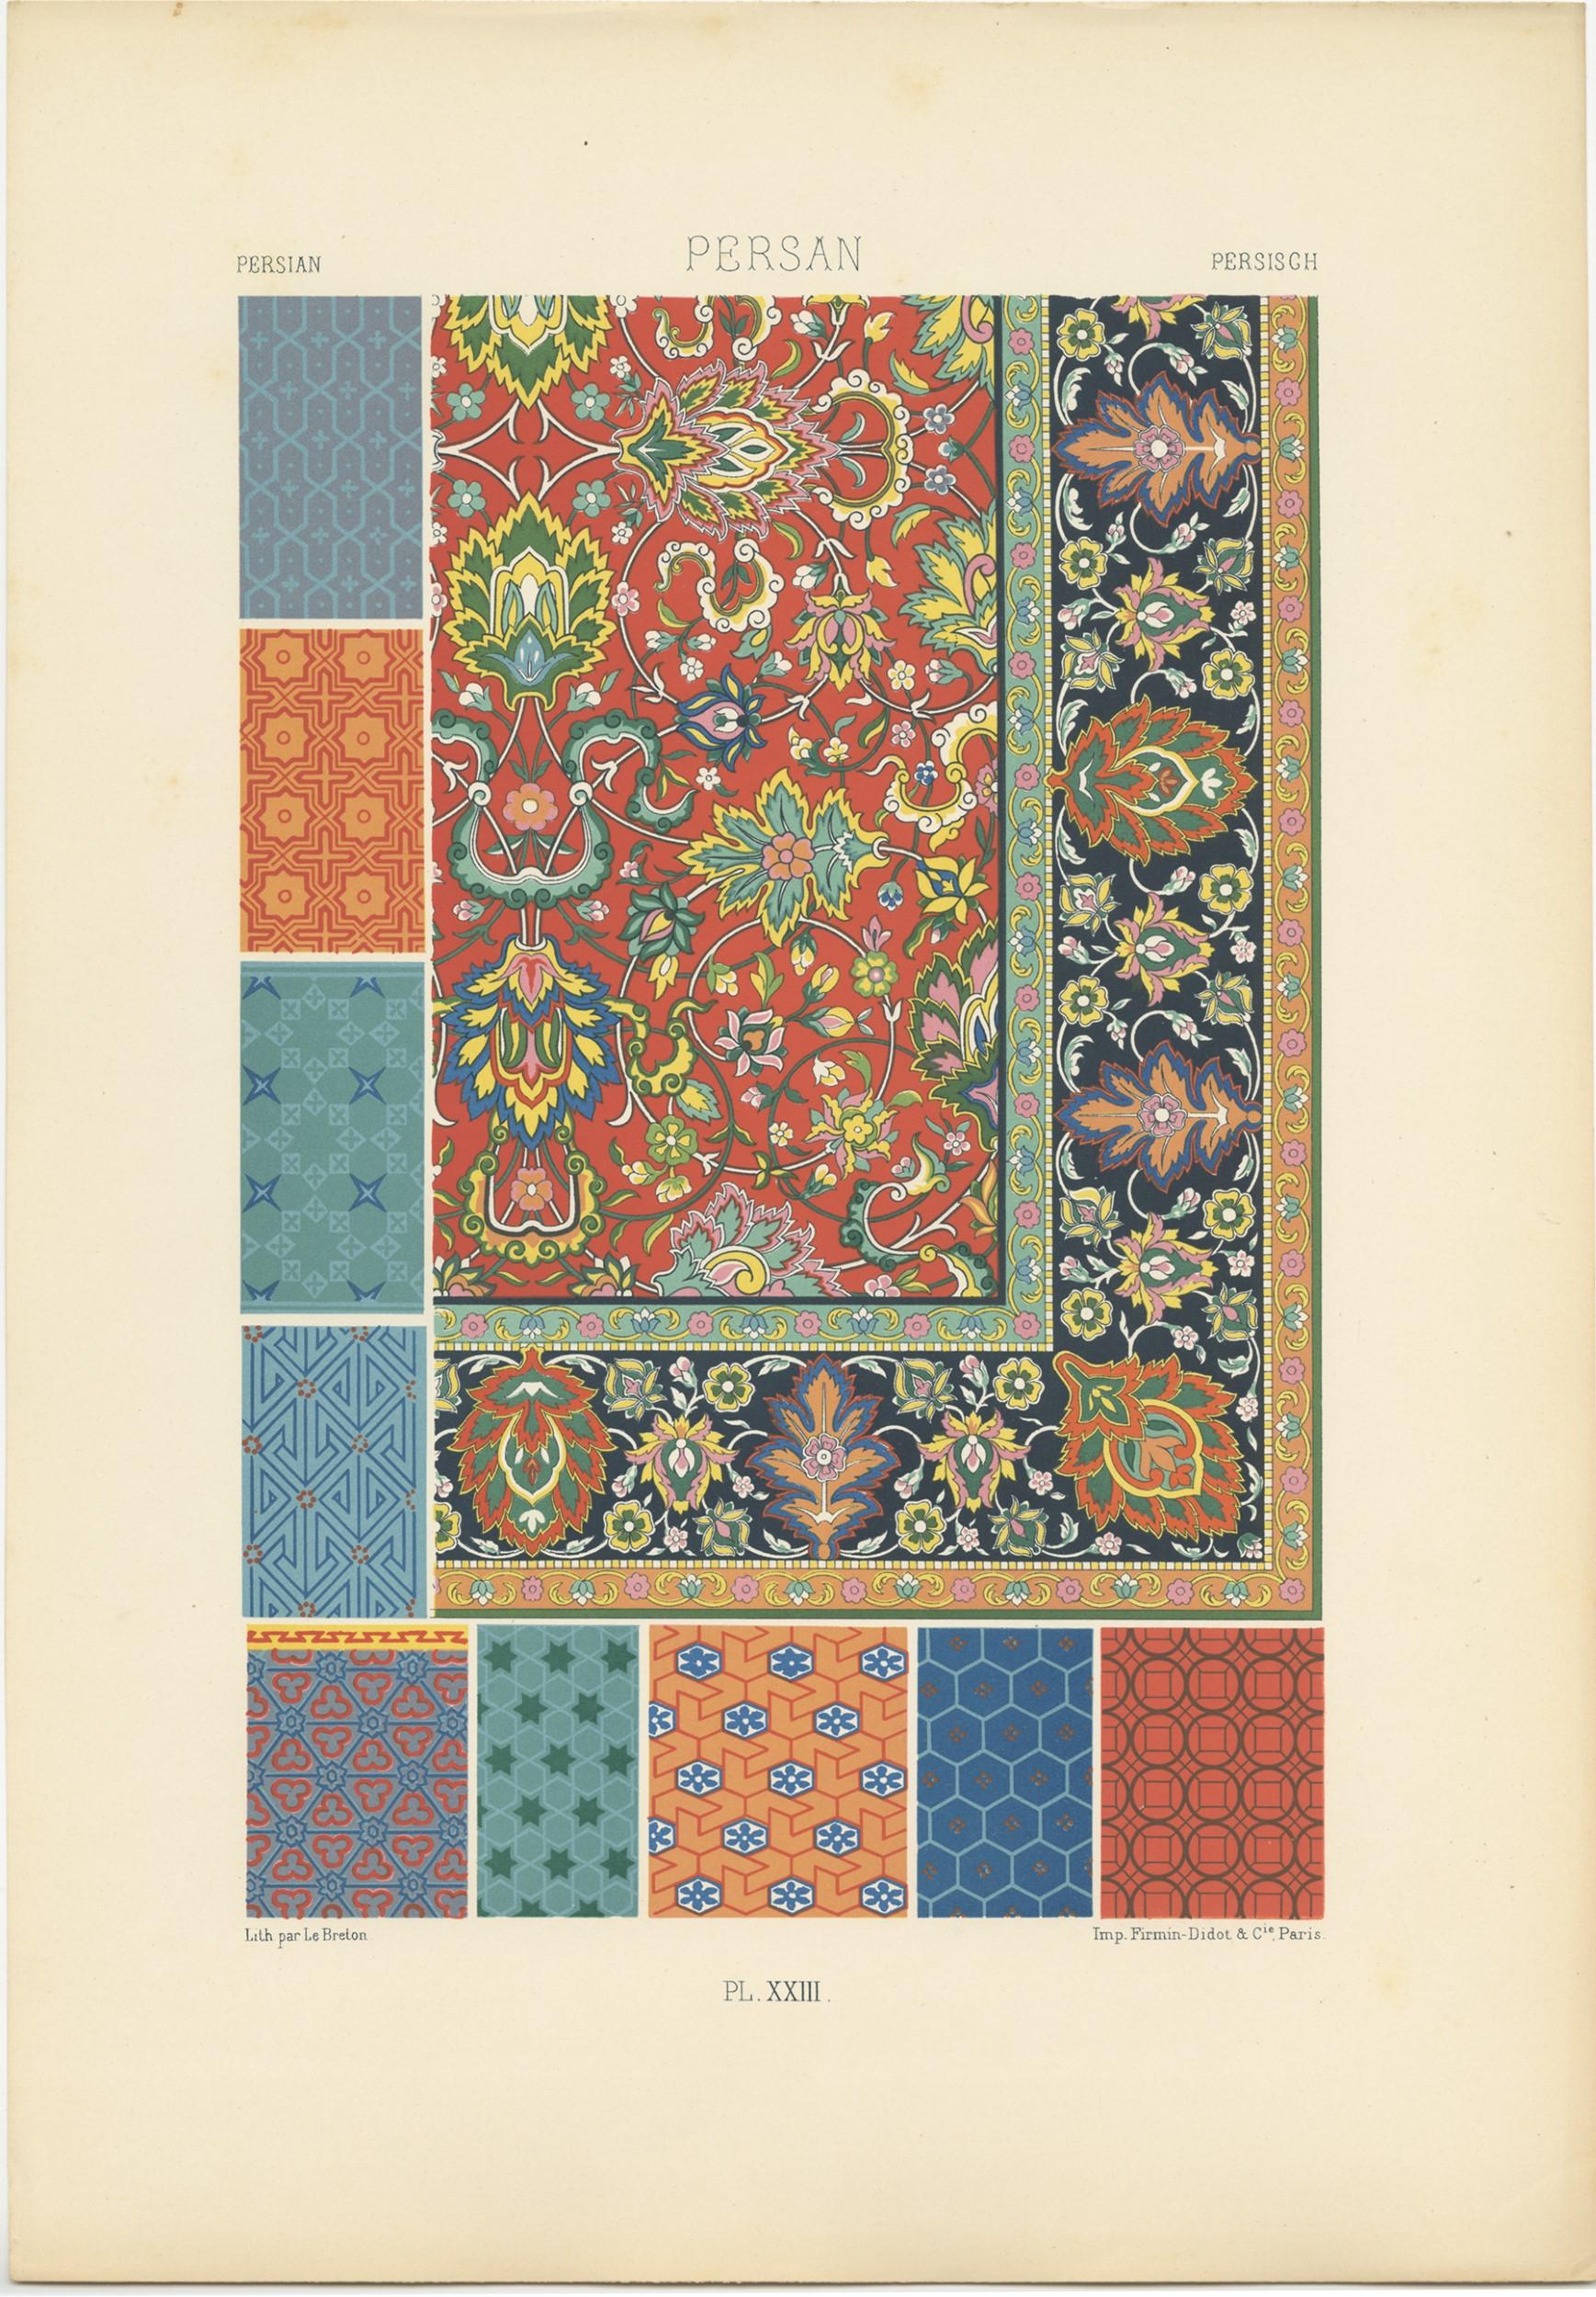 Antique print titled 'Persian - Persan - Persisch'. Chromolithograph of Persian ornaments and decorative arts. This print originates from 'l'Ornement Polychrome' by Auguste Racinet. Published, circa 1890.